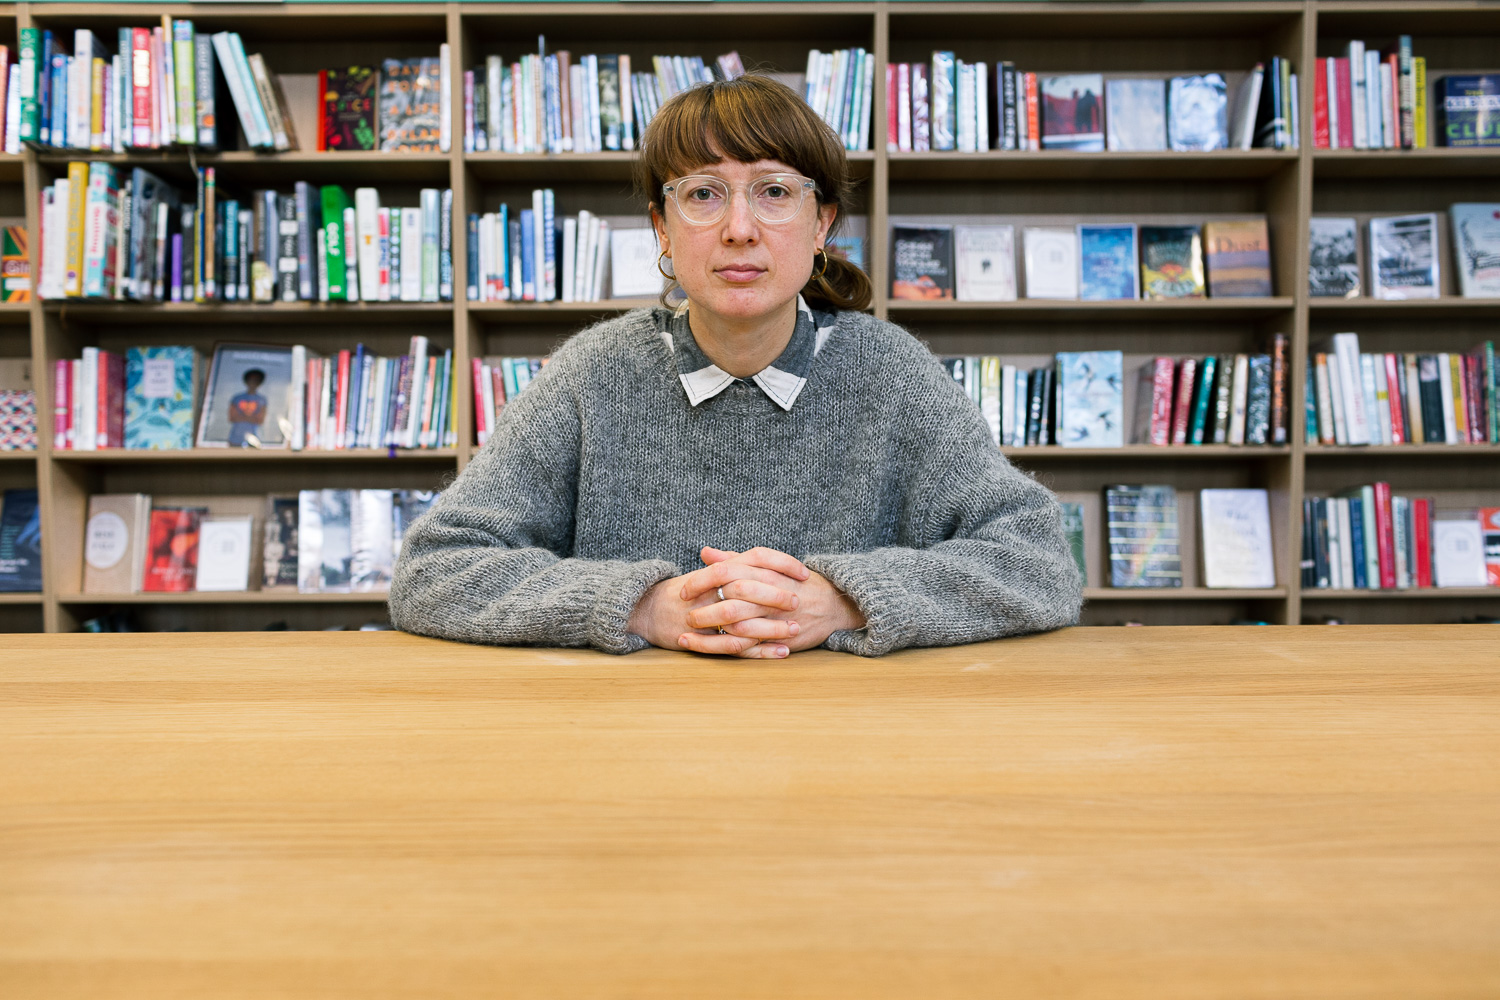 Artist Ruth Beale sitting at a desk in a library